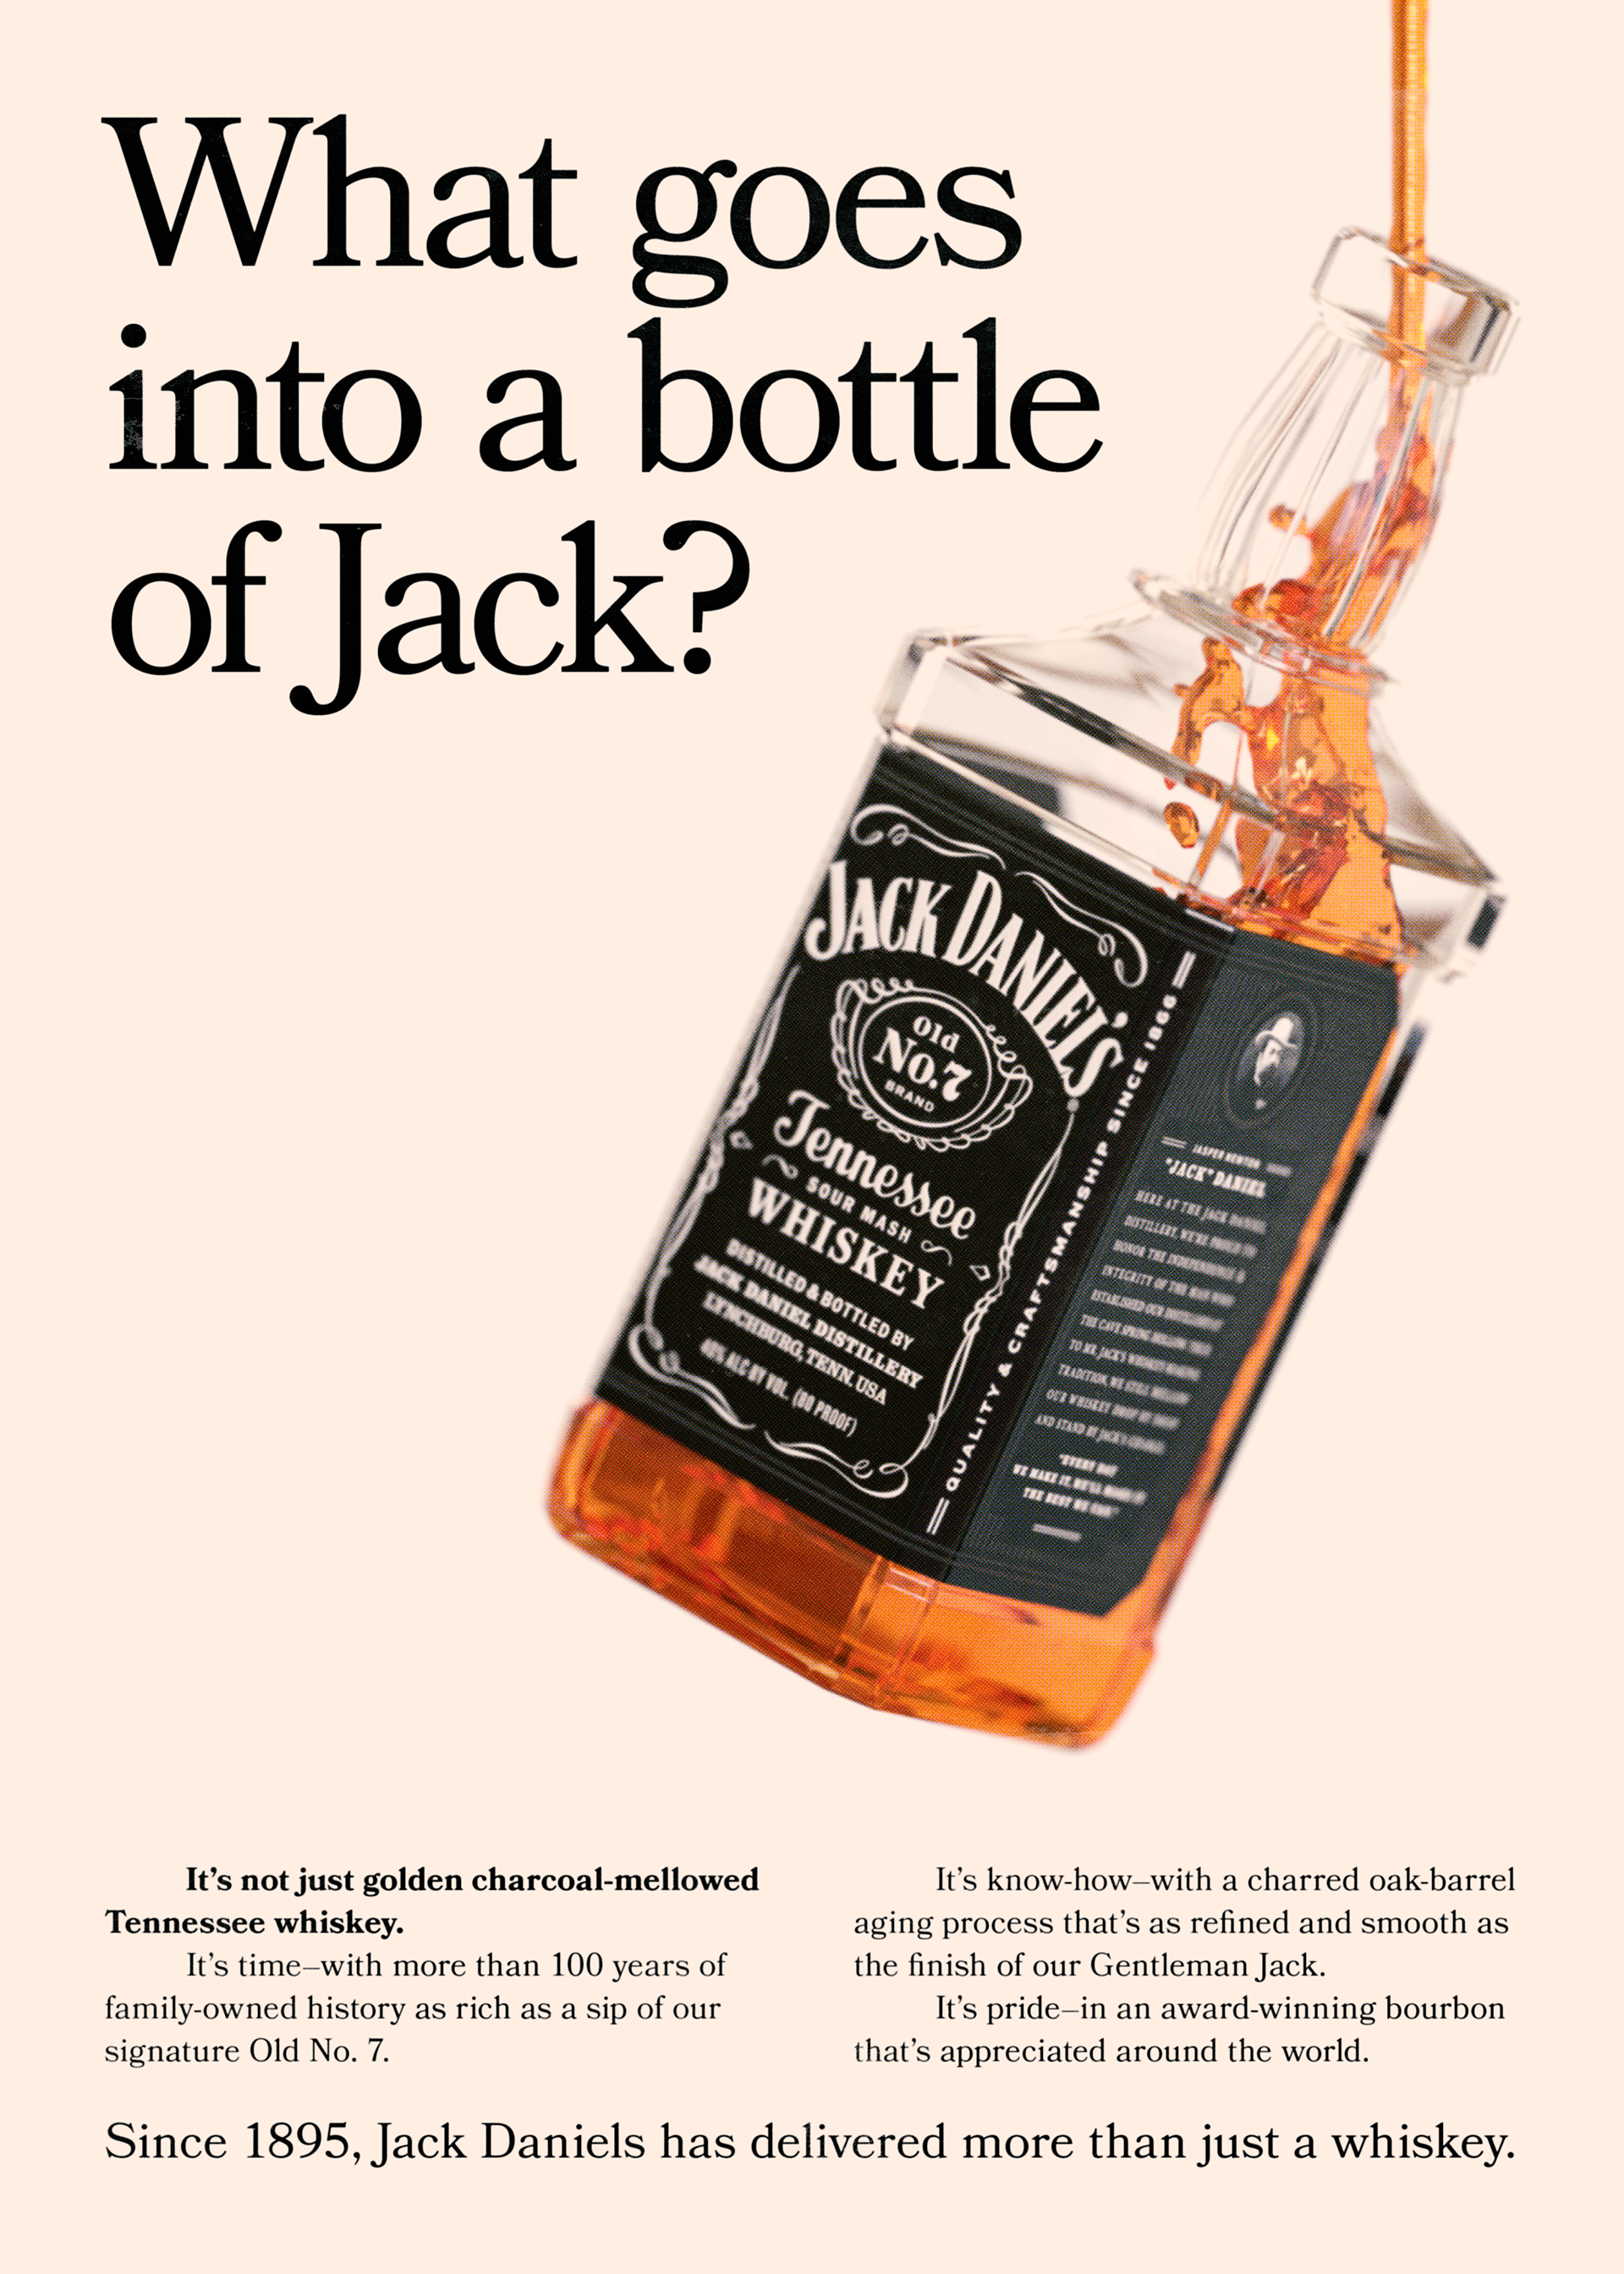 What goes into a bottle of Jack?